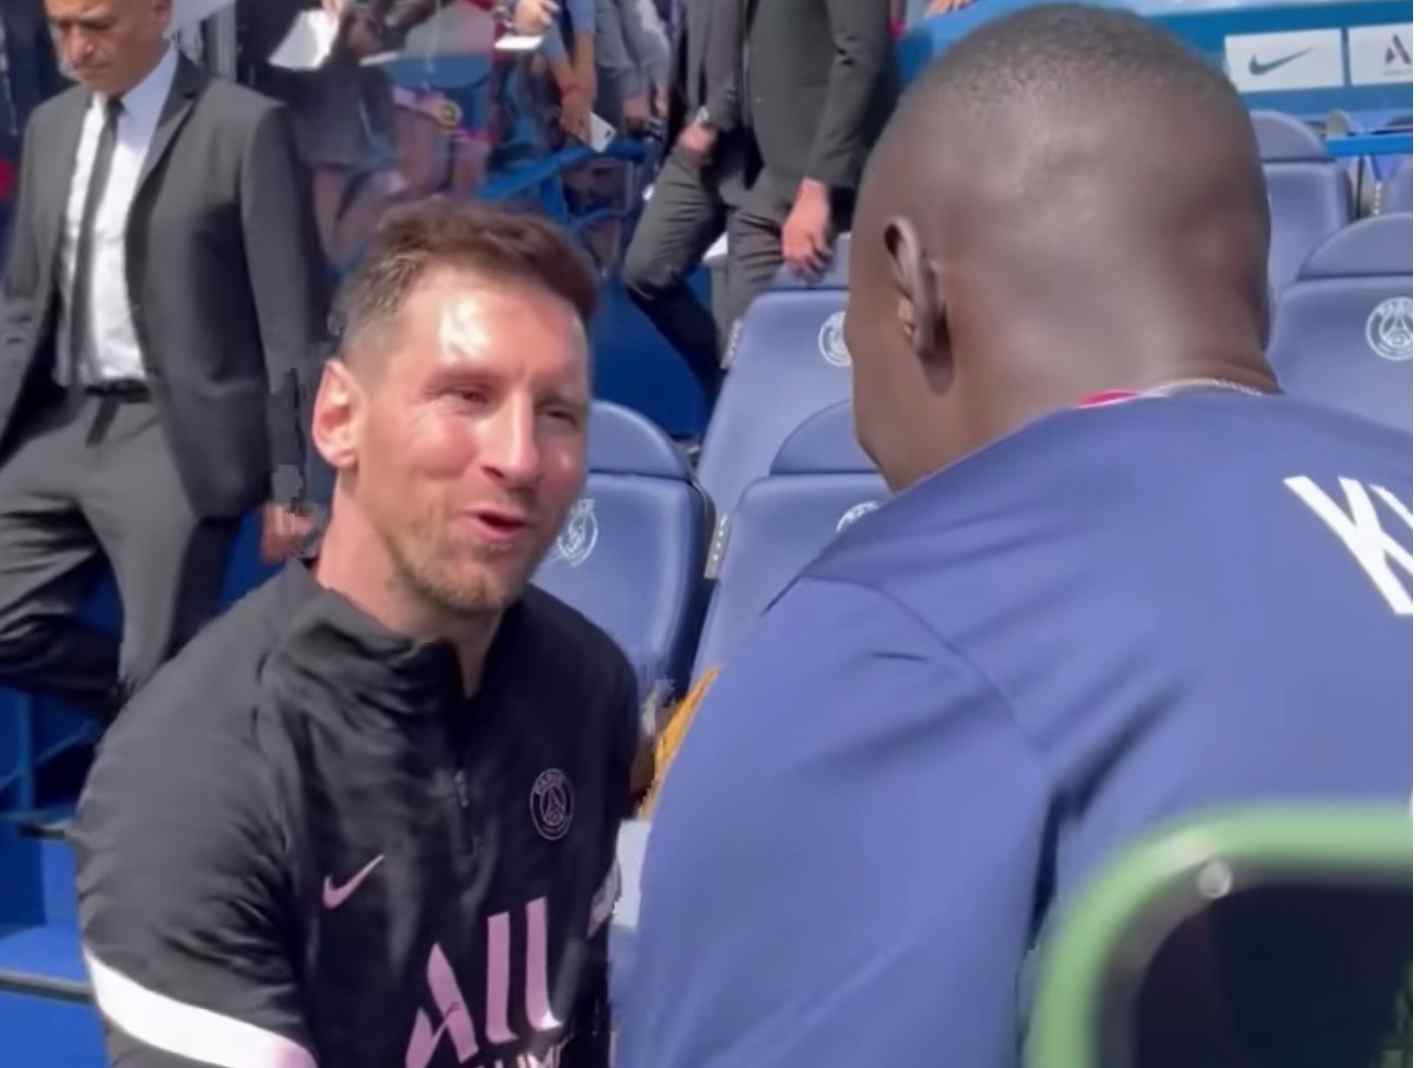 In this image - Lionel Messi meeting Khaby Lame